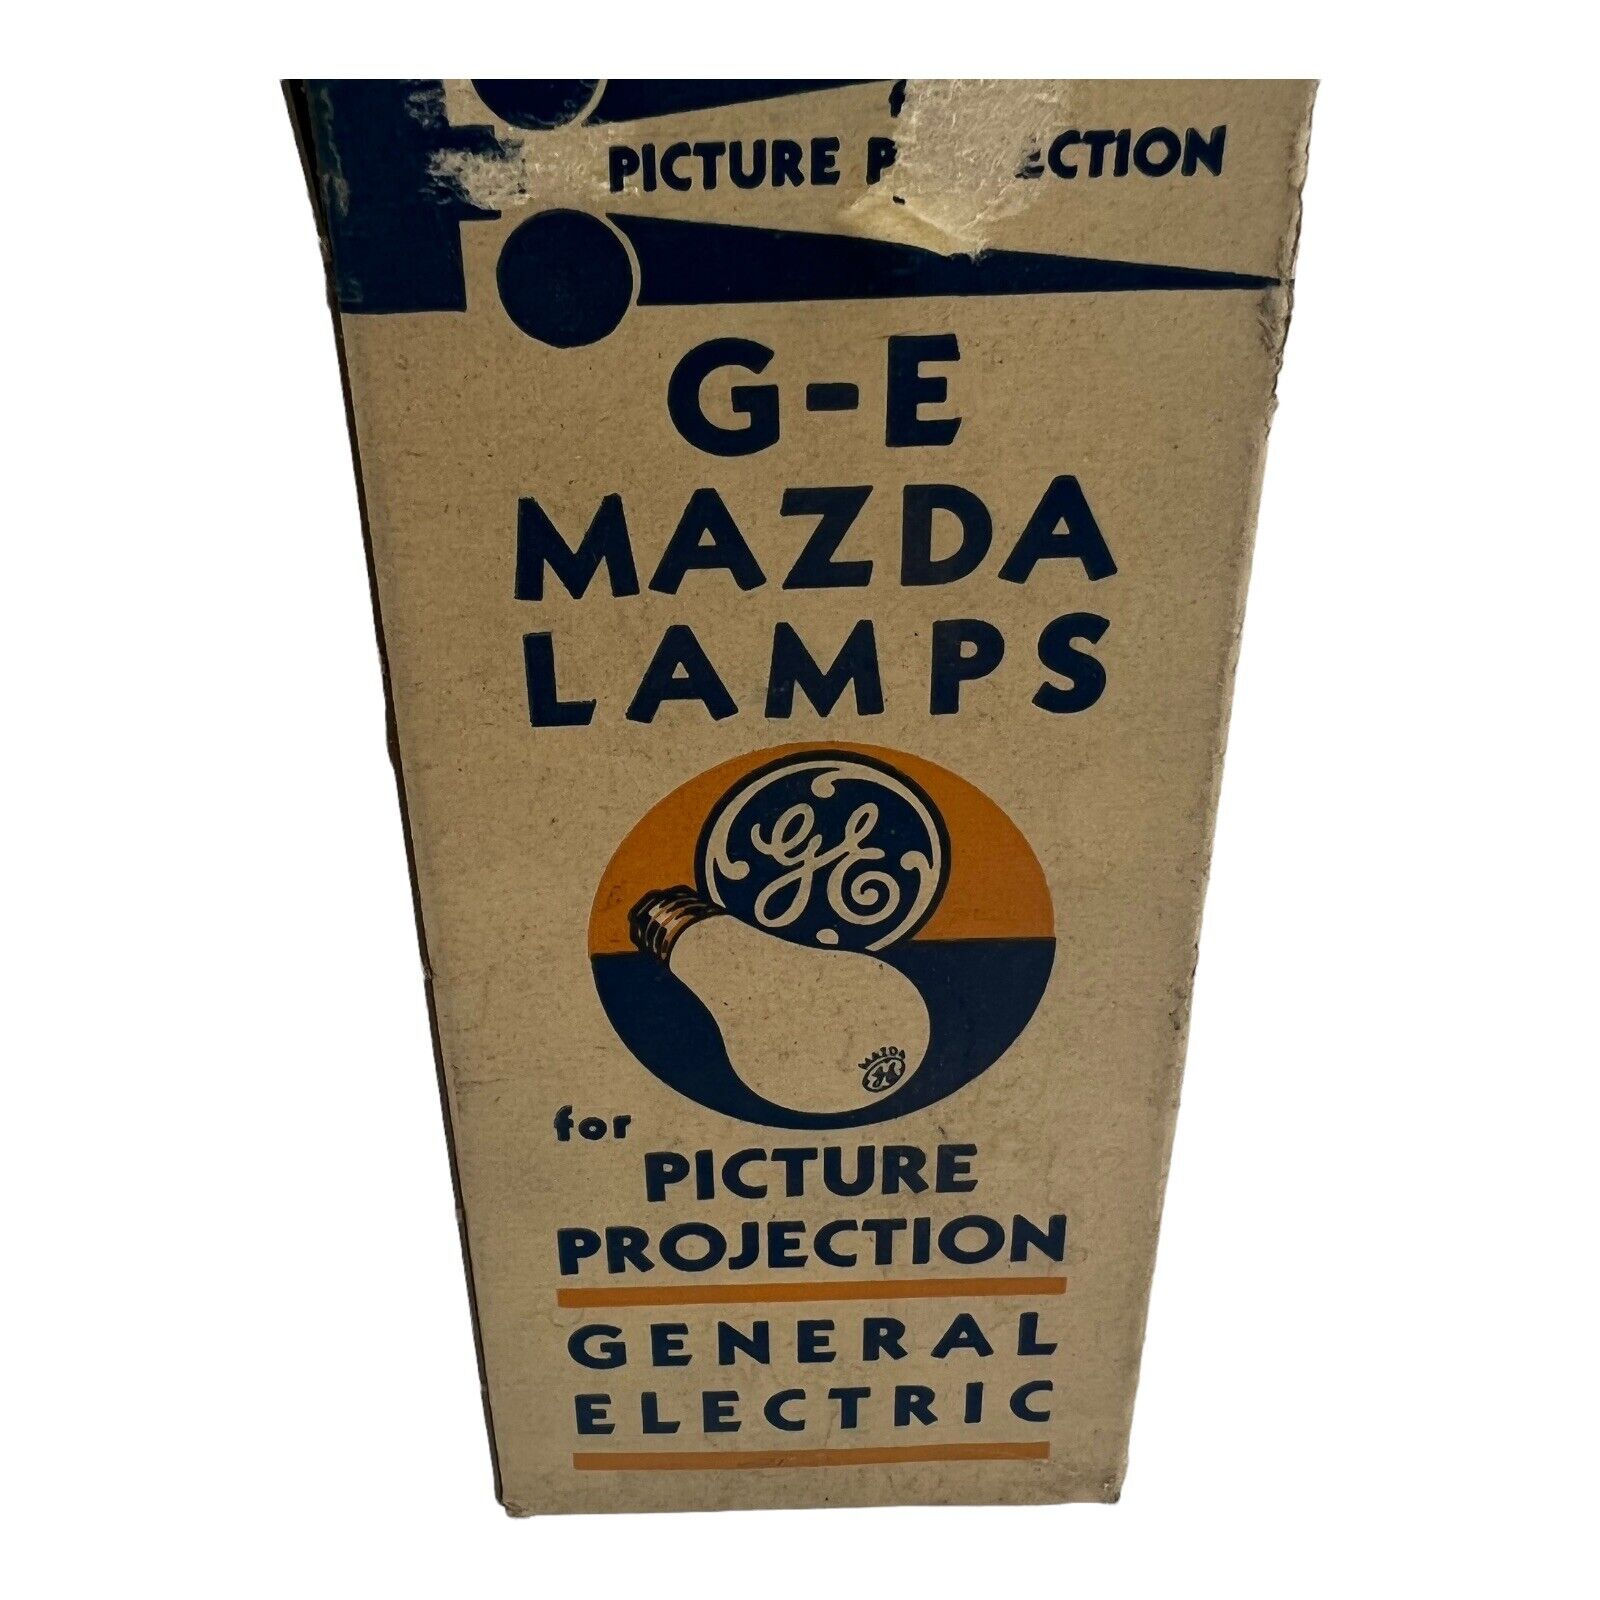 GE Mazda Lamps for Picture Projection 120V 750W T12 Bulb Code 750t12 Vintage